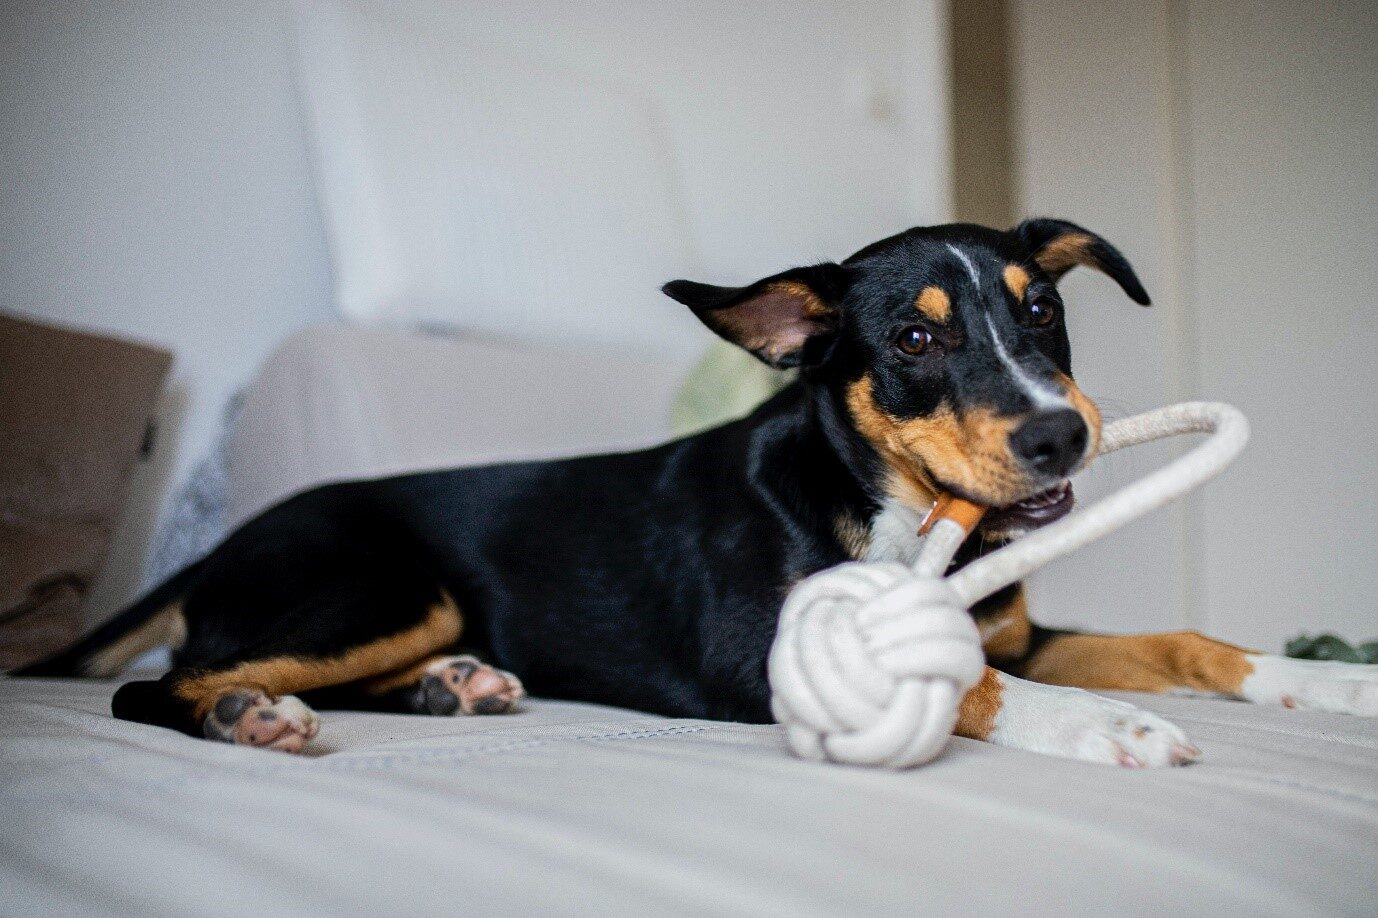 5 Boredom Busters for Dogs While We're All Home